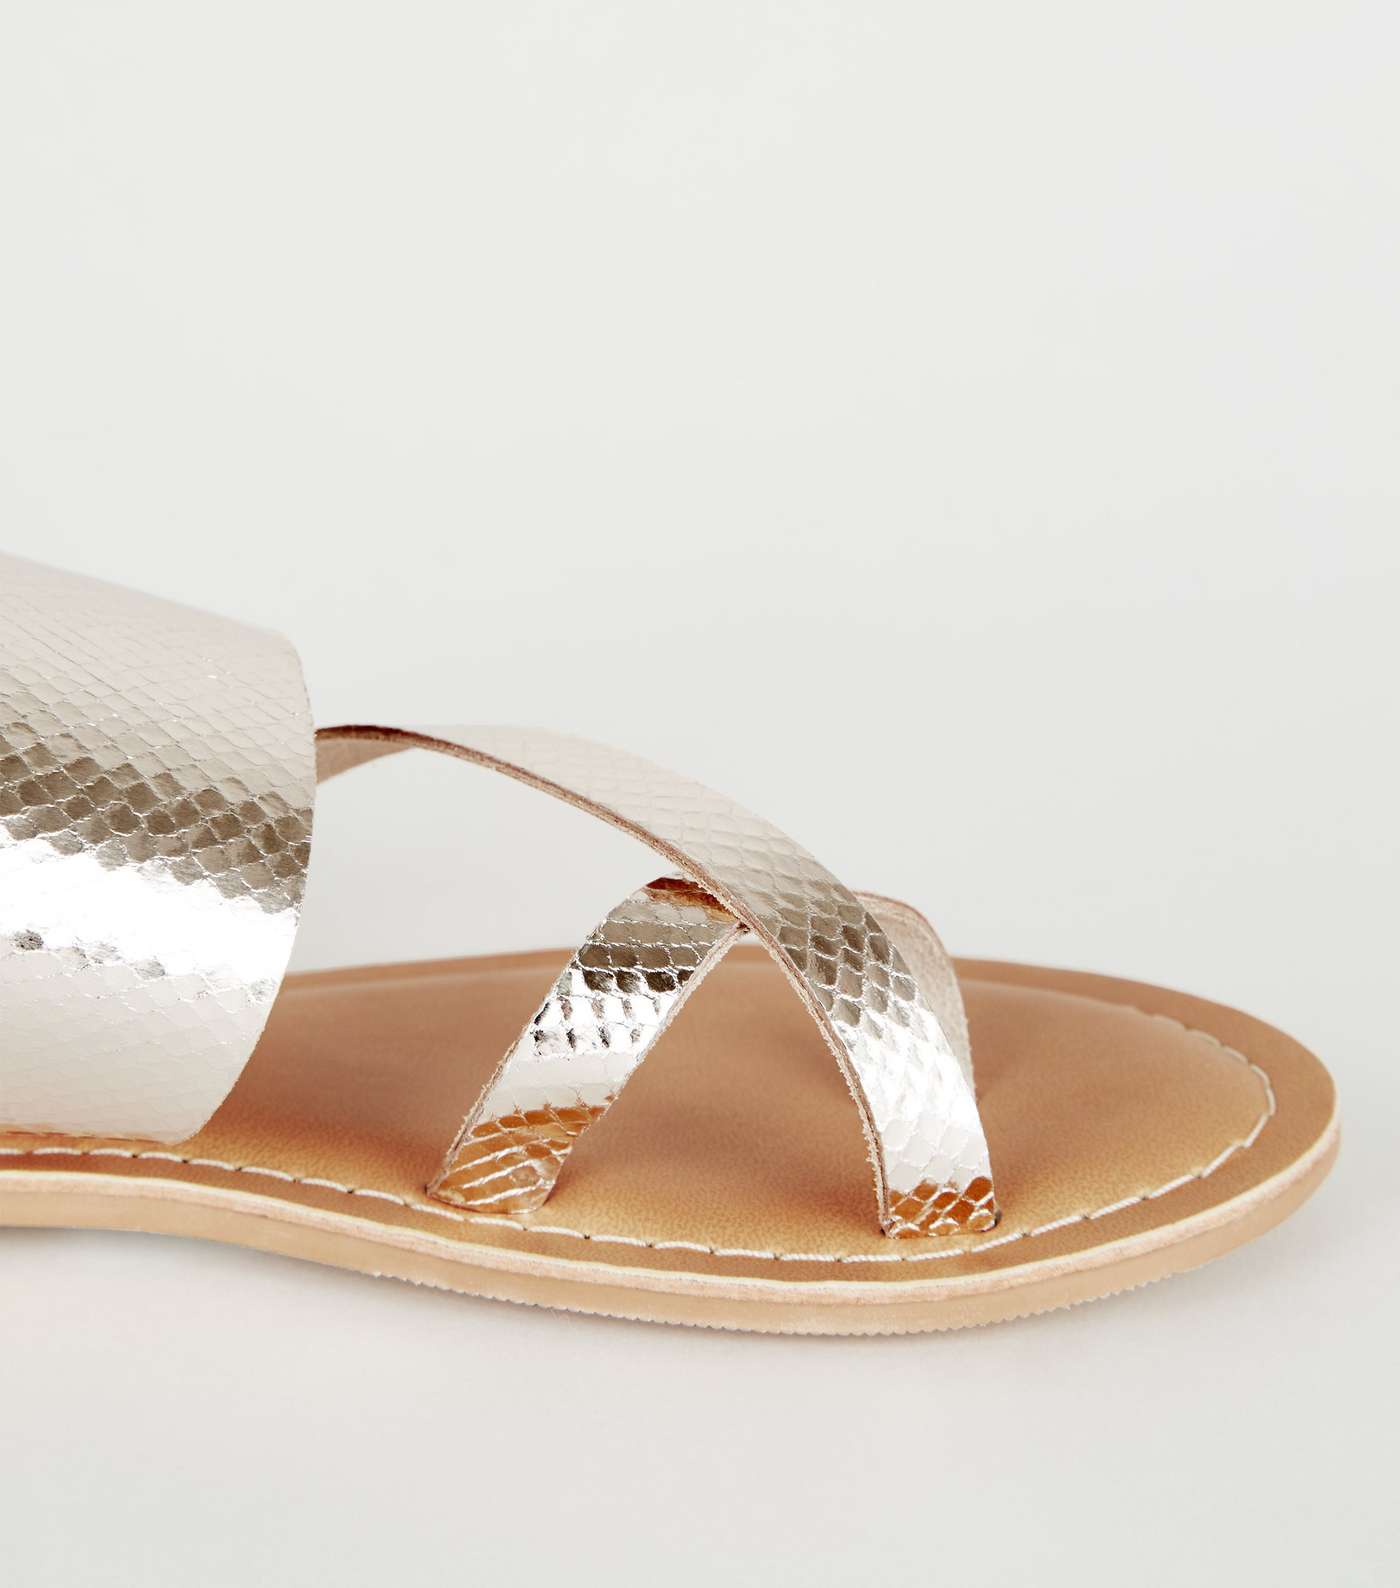 Gold Leather Toe Loop Strappy Sliders Image 4